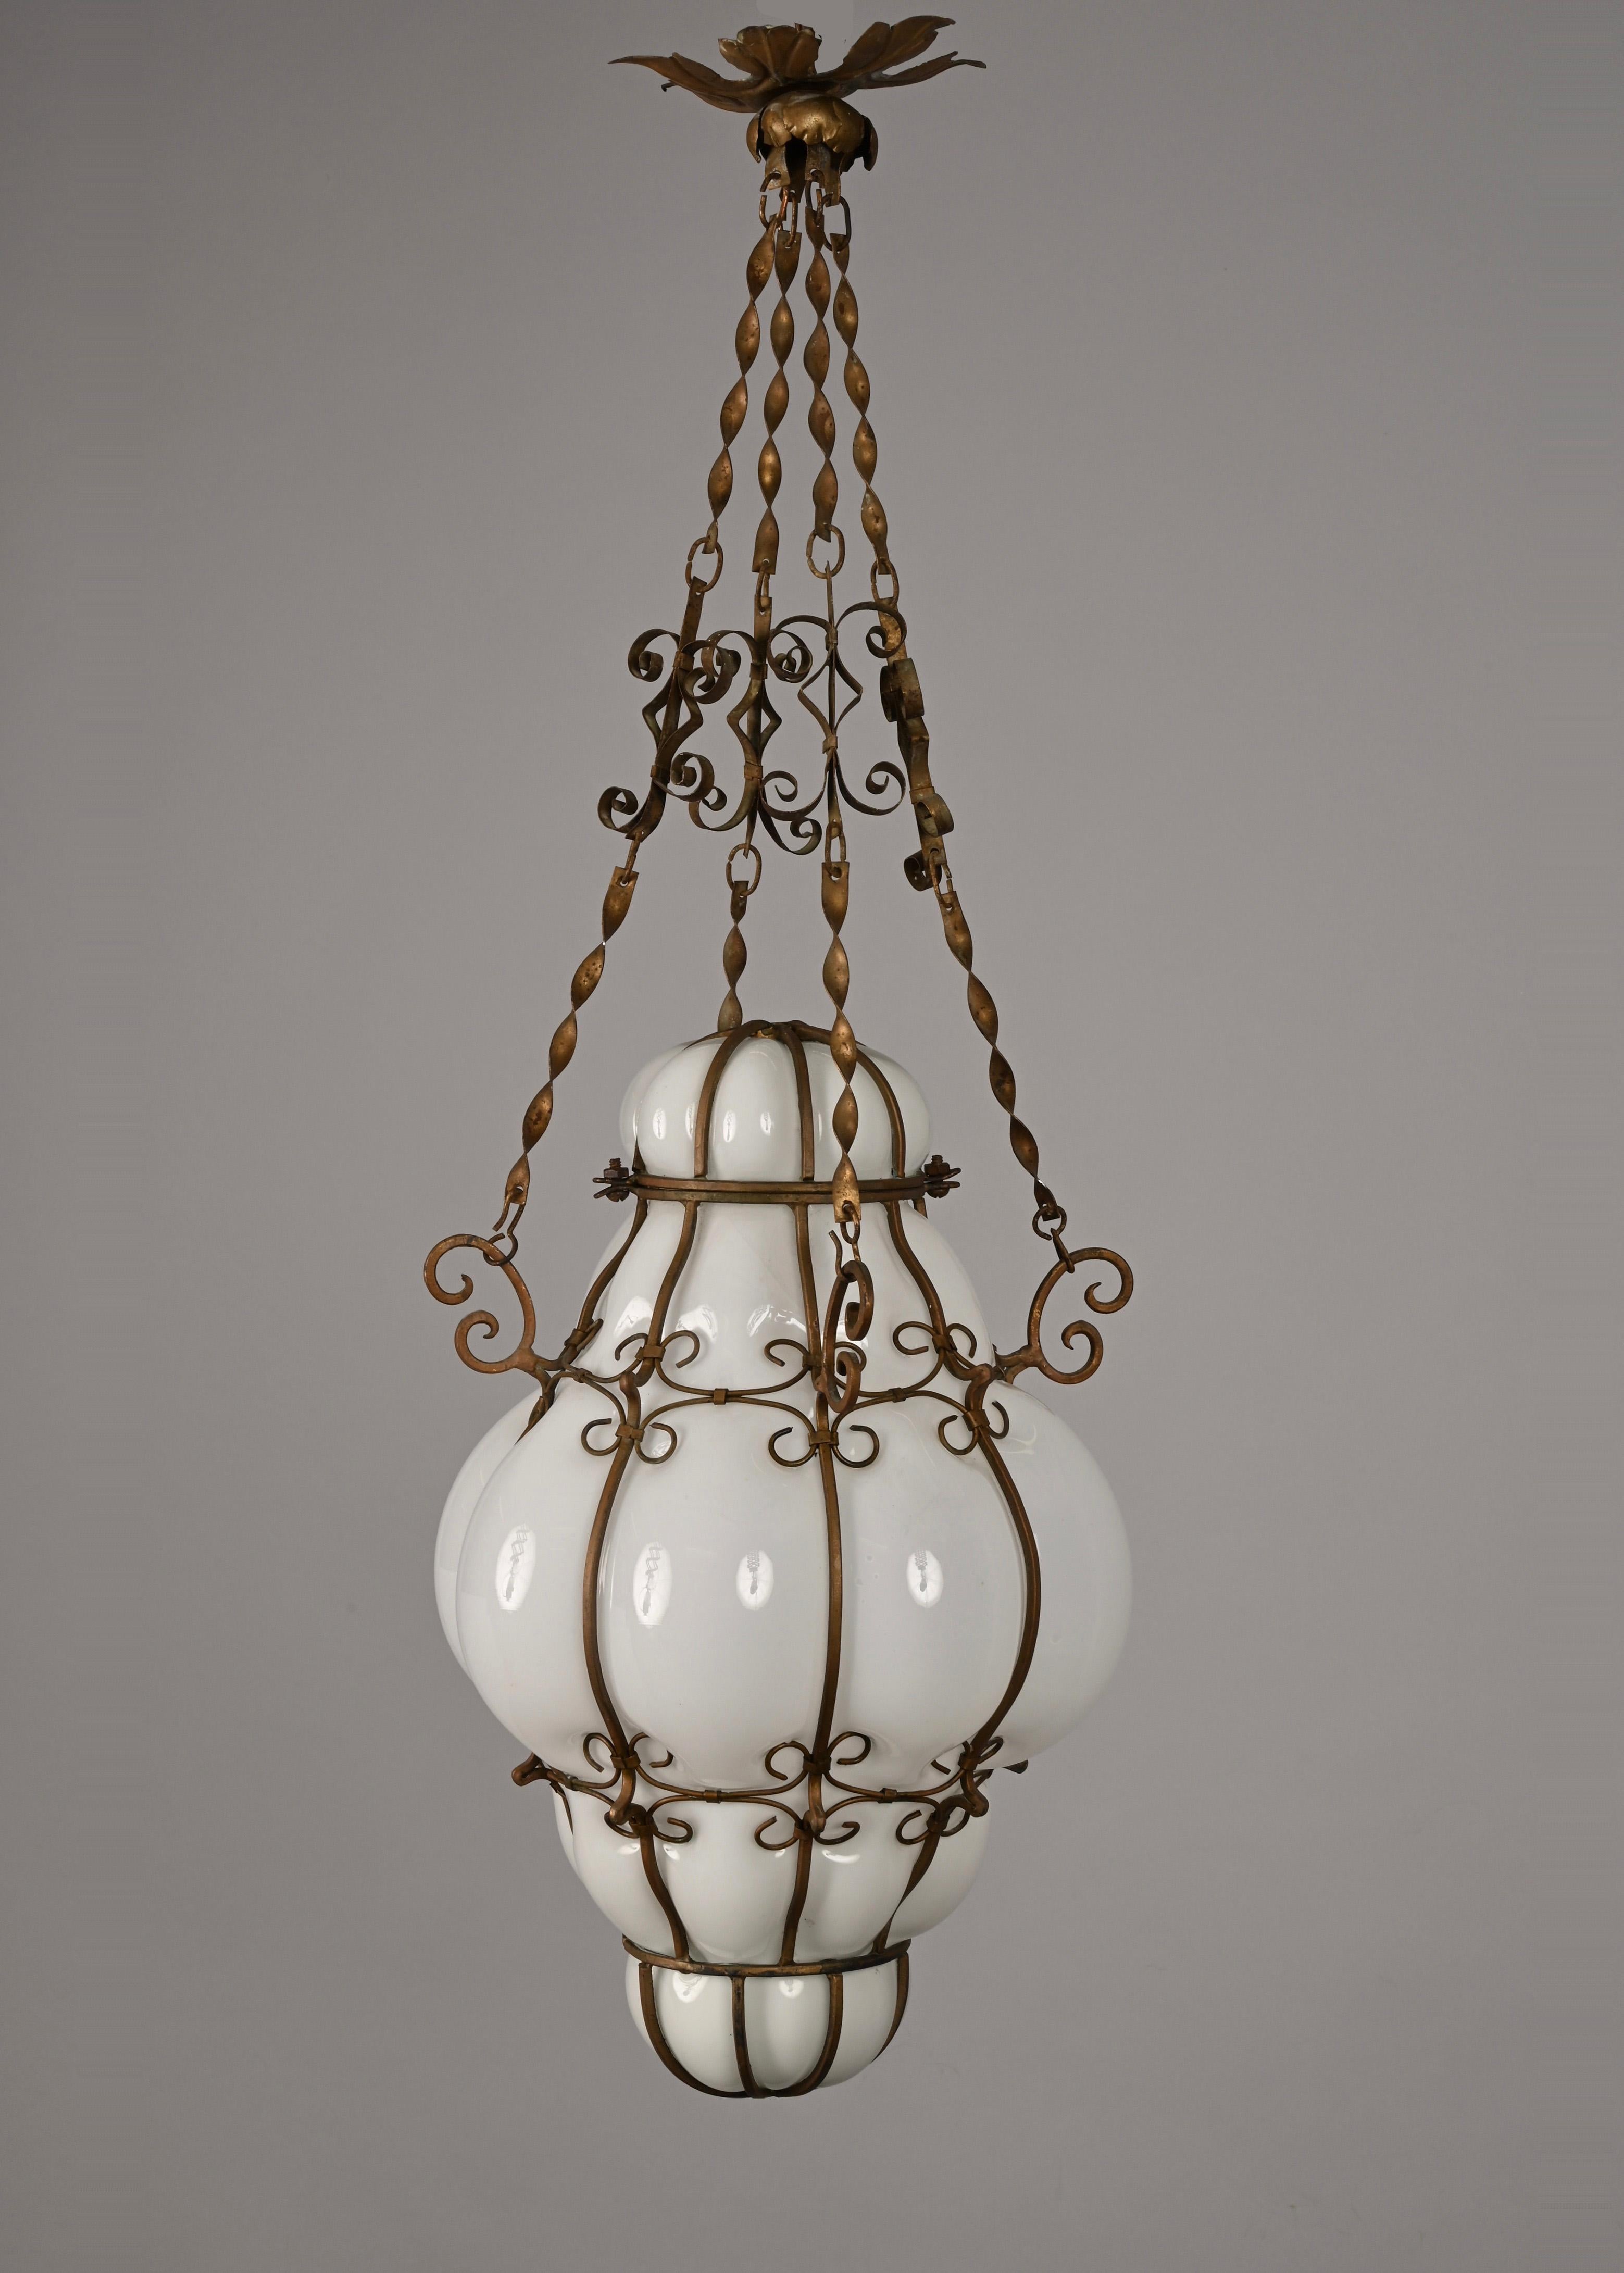 Midcentury Venetian Brass and Mouth Blown Murano White Glass Chandelier, 1940s For Sale 10